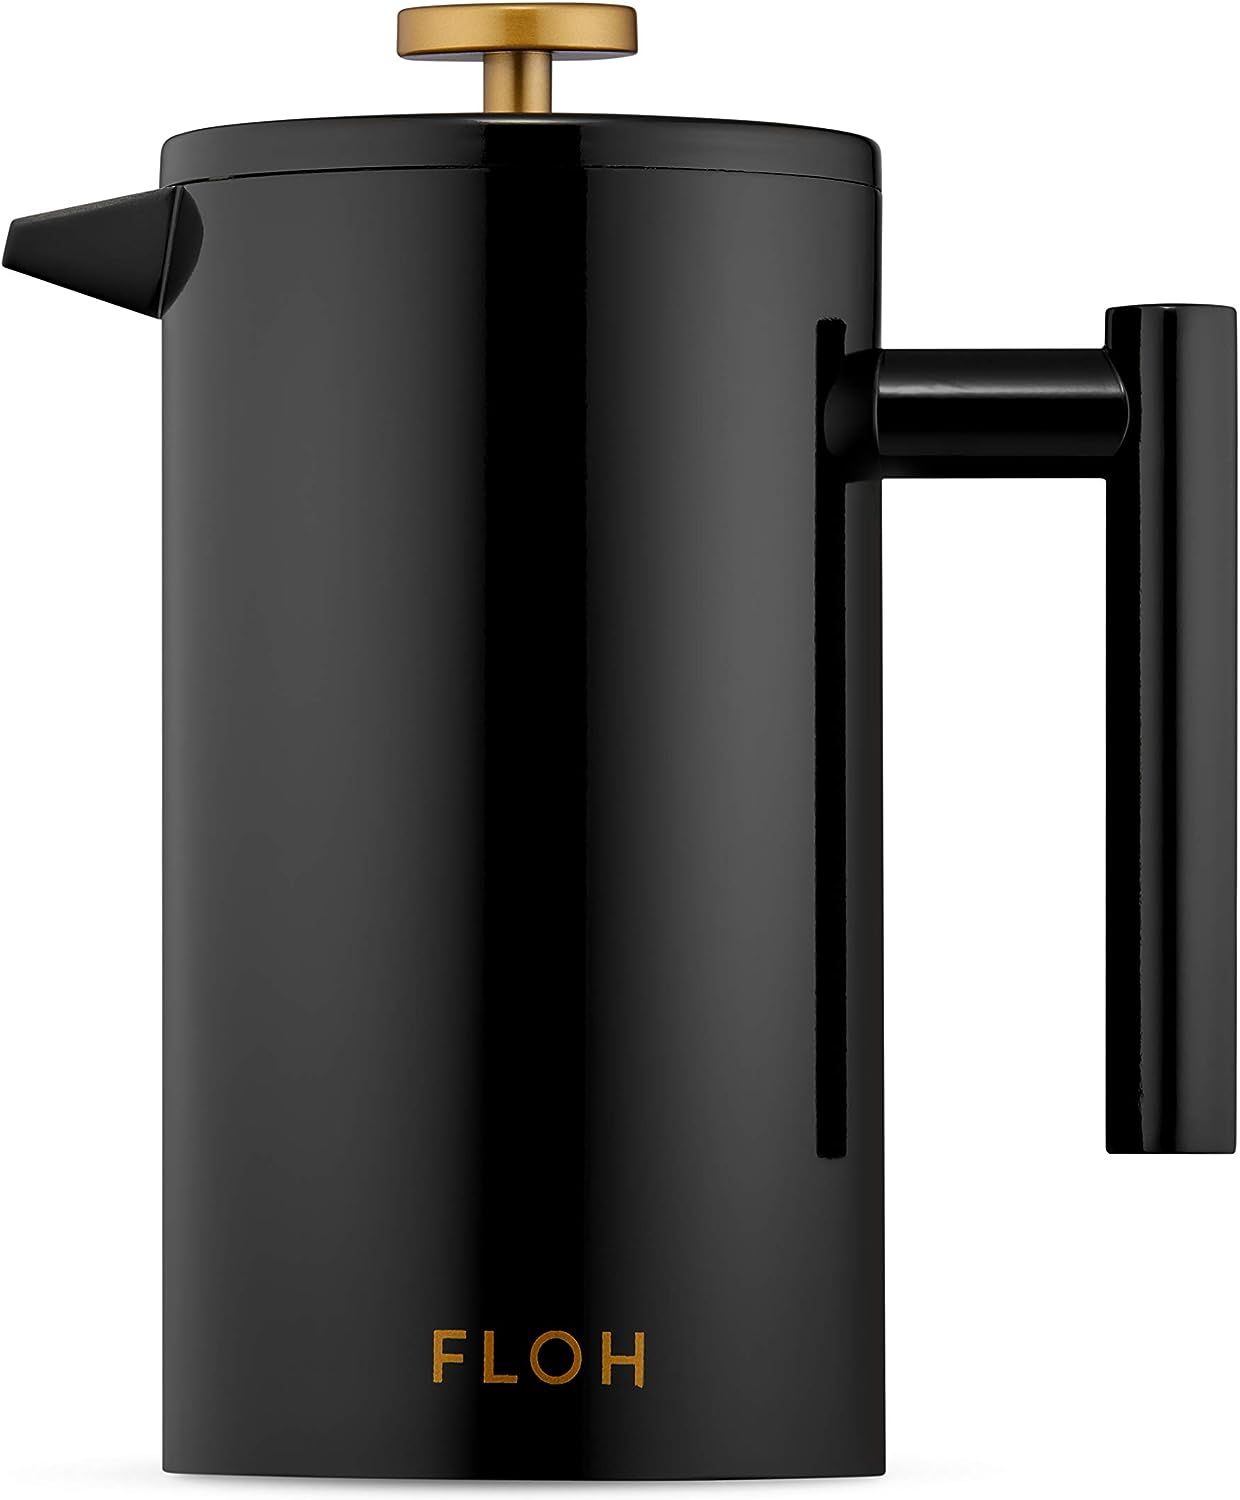 Floh French Press for Coffee & Tea in Black Gloss - 34 Oz Insulated Stainless Steel Coffee Maker | Amazon (US)